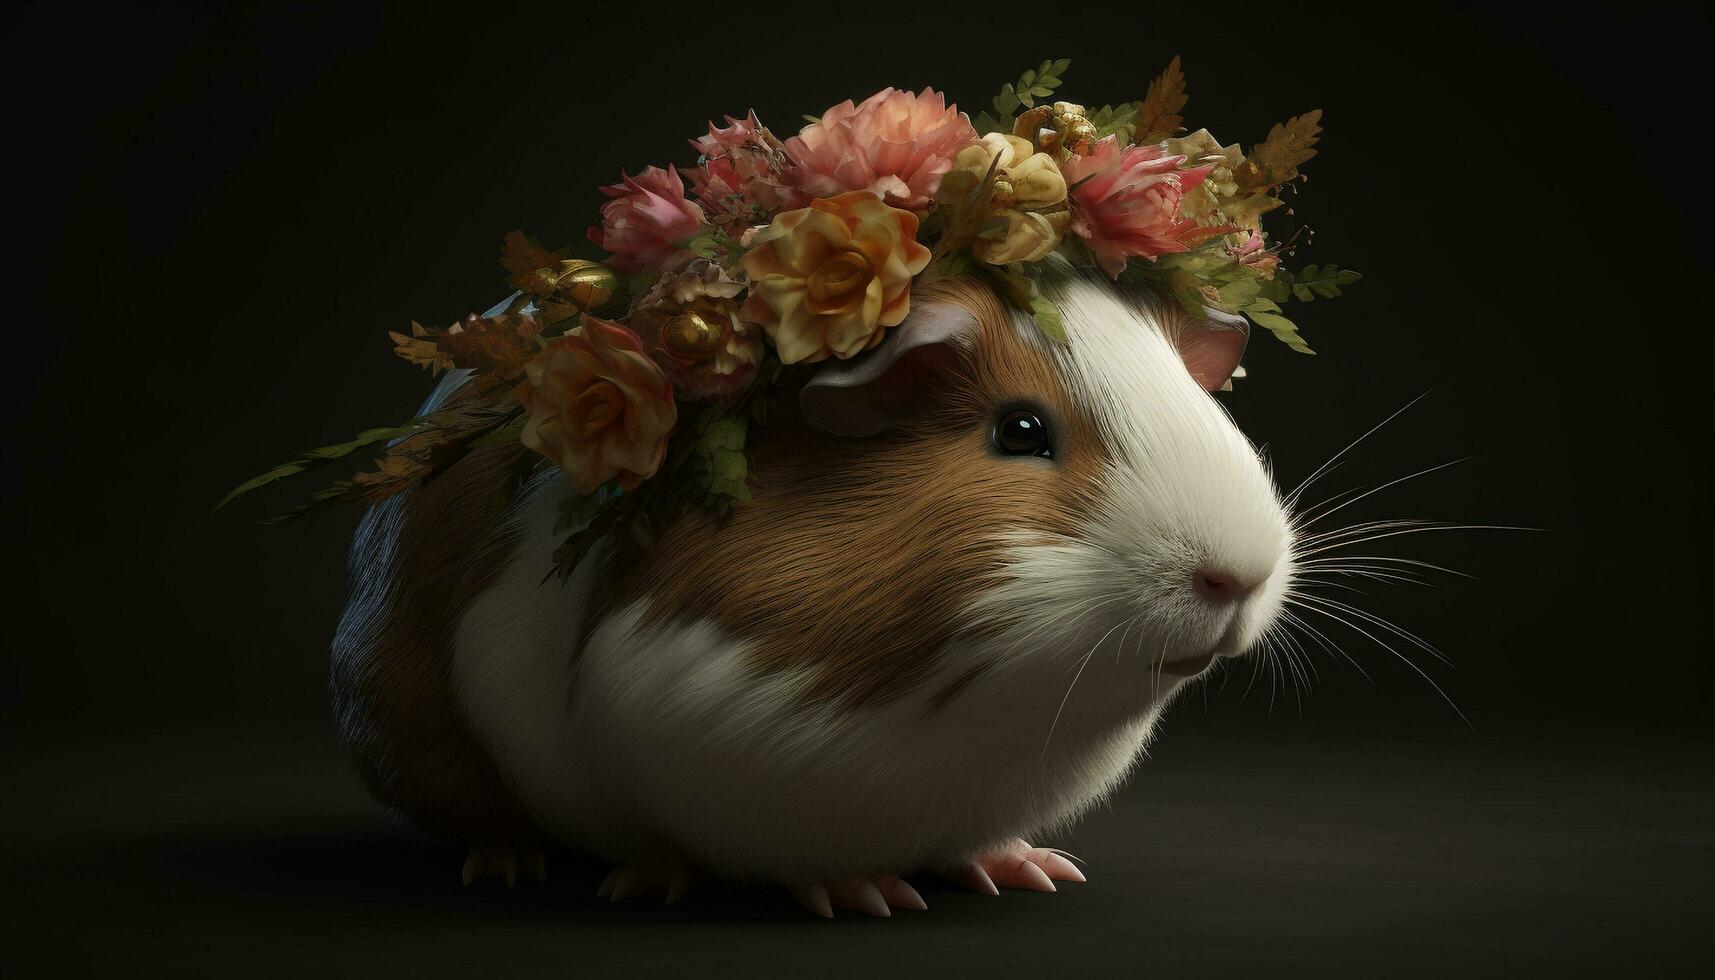 Fluffy young rabbit with whiskers sitting on grass, surrounded by flowers generated by AI photo